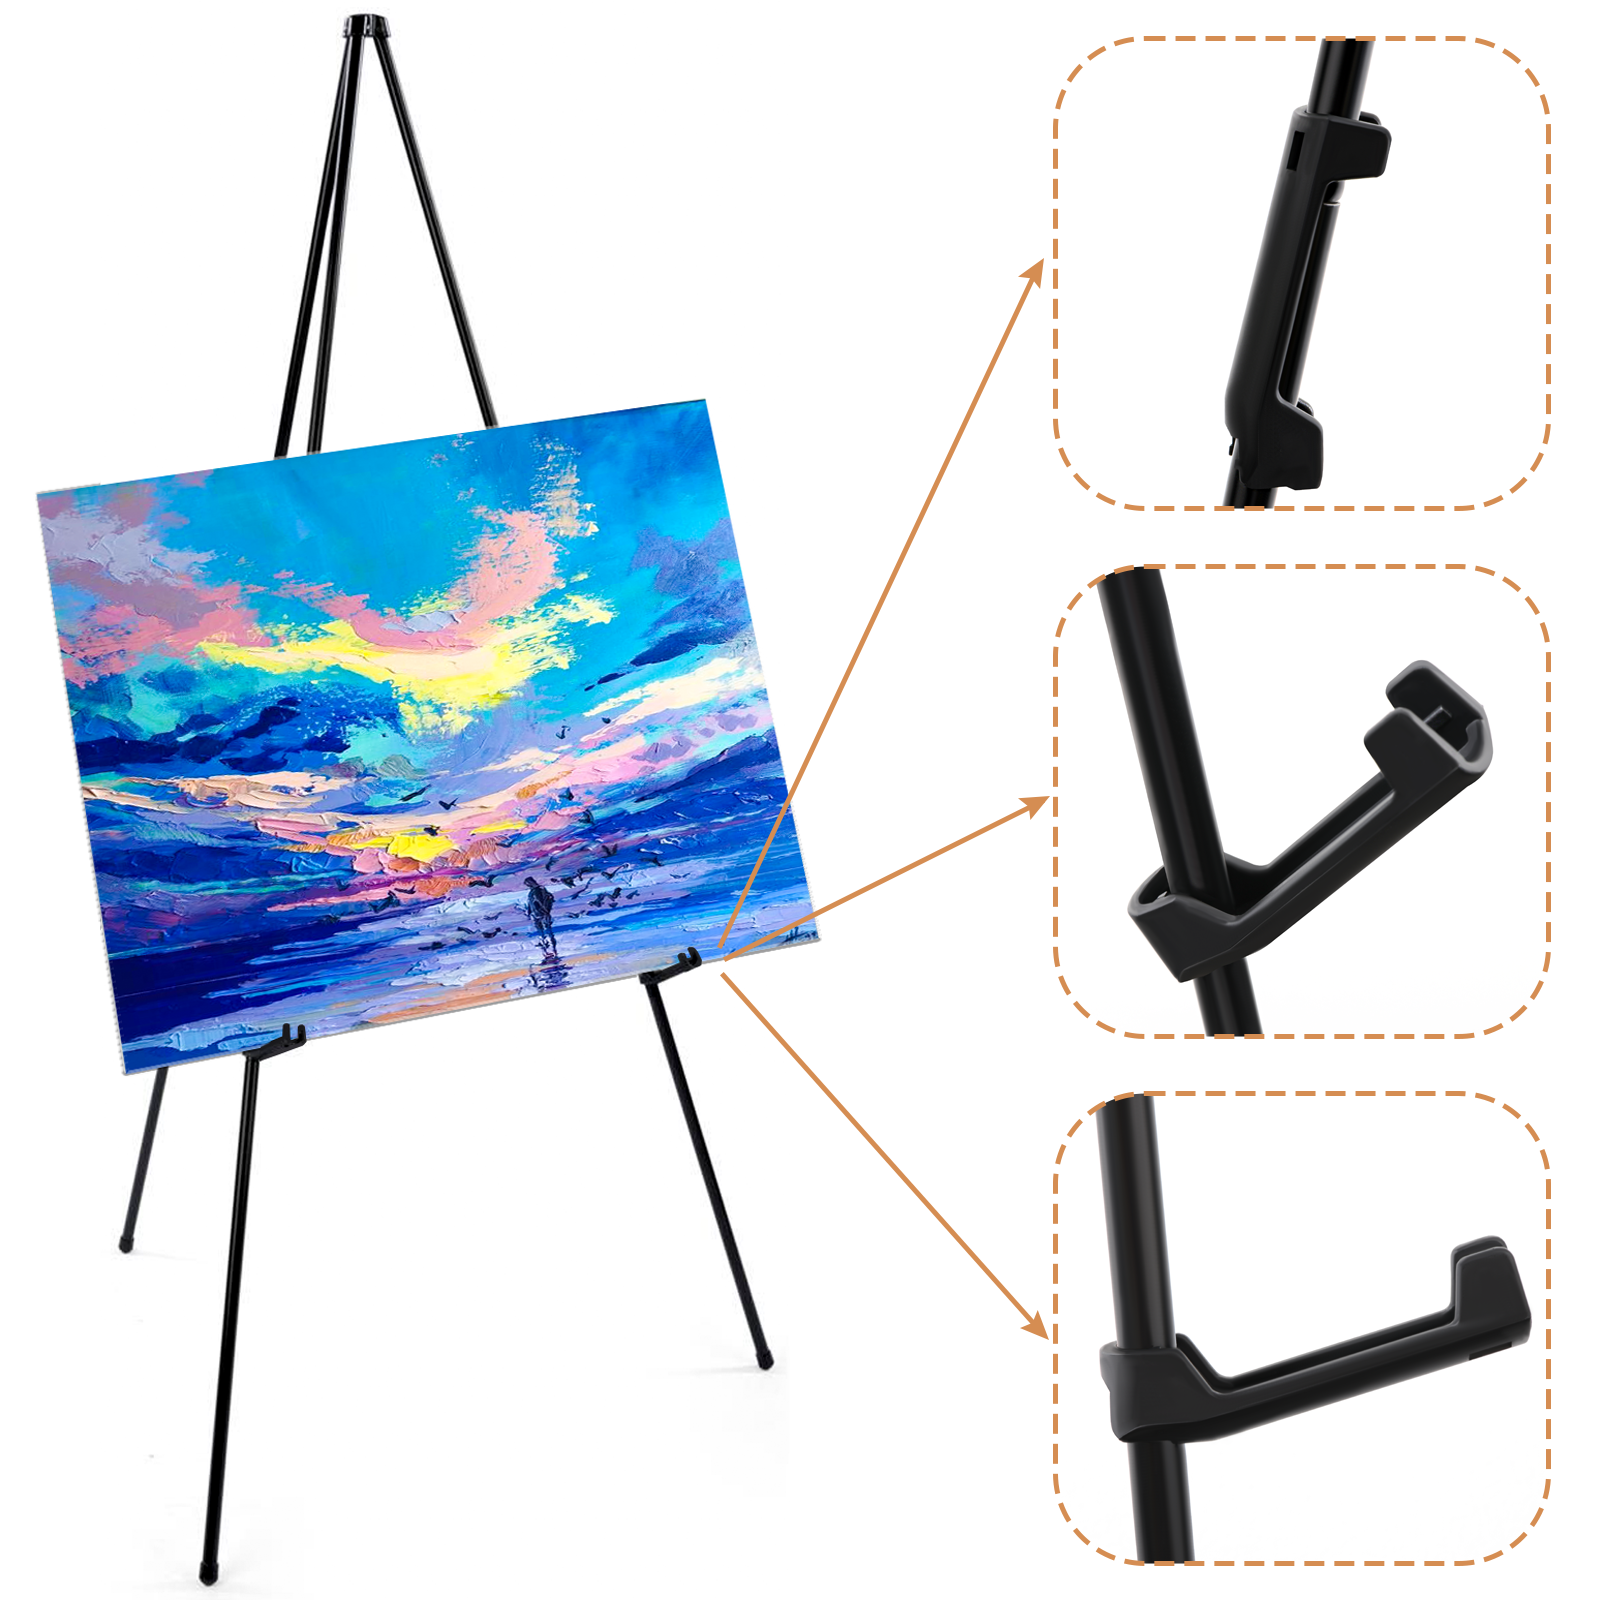  BIJIAMEI 63 Floor Display Easel Stand, Foldable Portable  Instant Easel Metal Tripod Easel for Display & Wedding Sign, Poster Stand  Art Easel with Portable Bag,Holds 5lbs